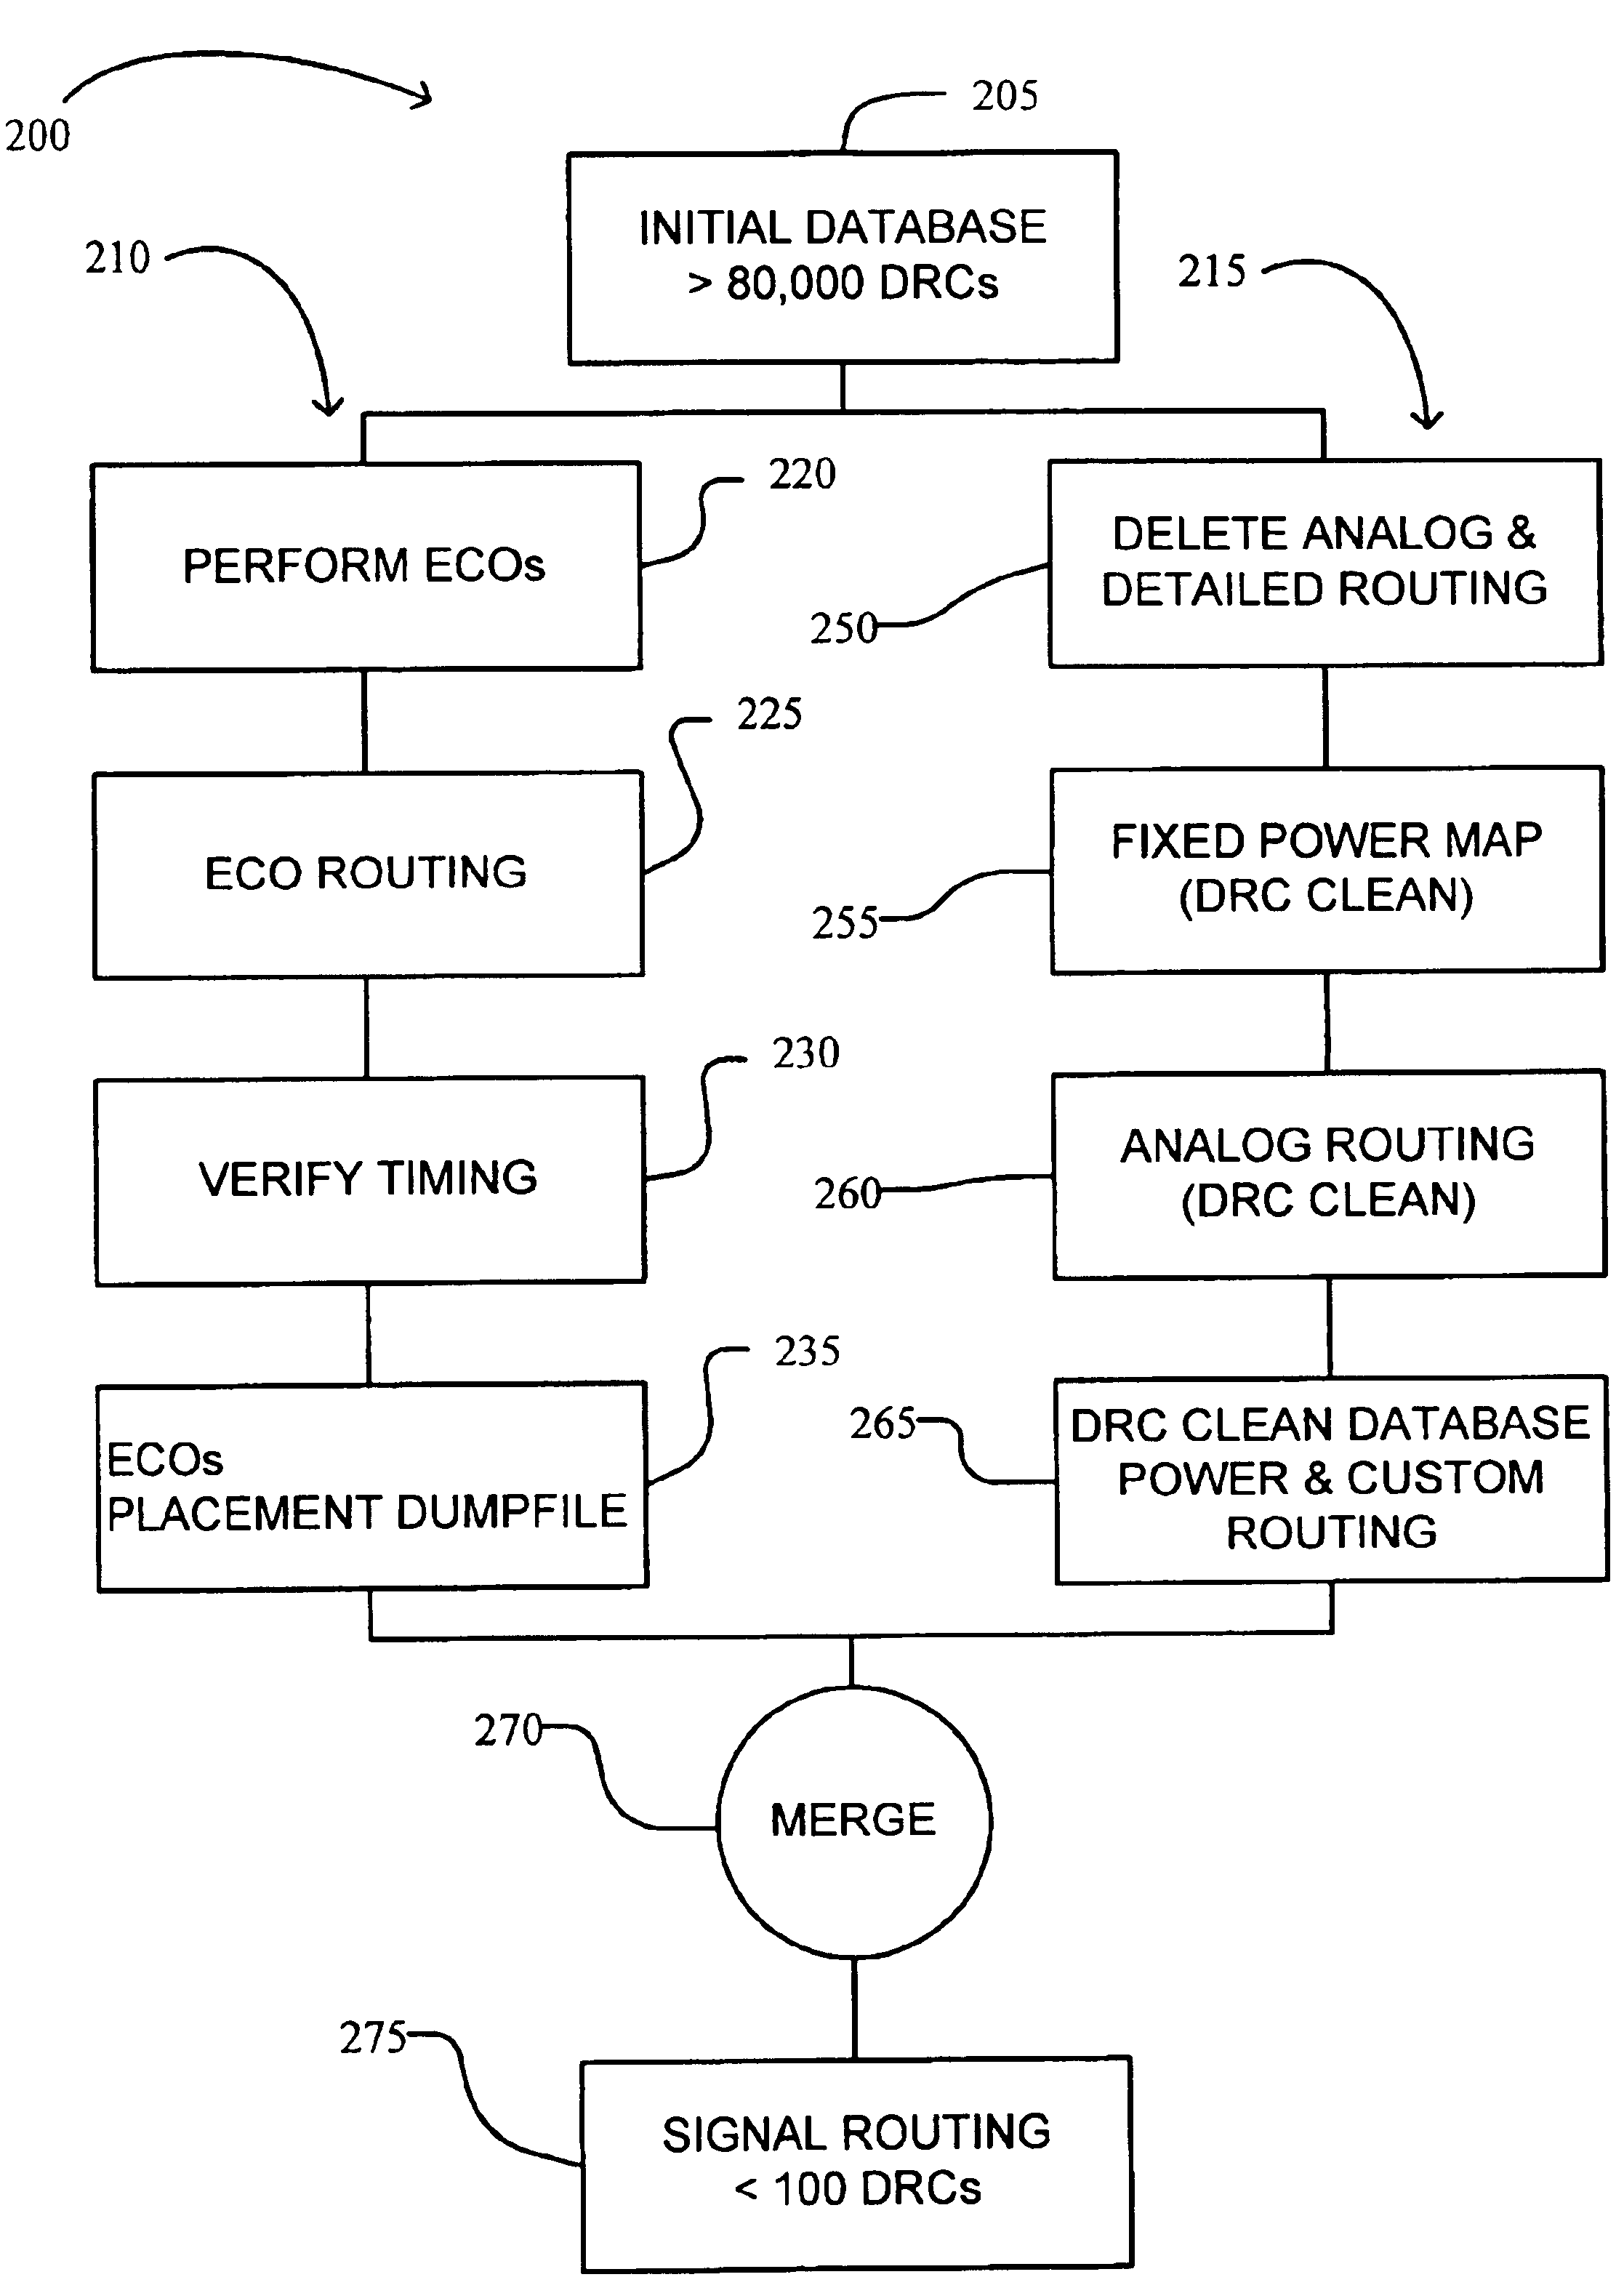 Split and merge design flow concept for fast turnaround time of circuit layout design